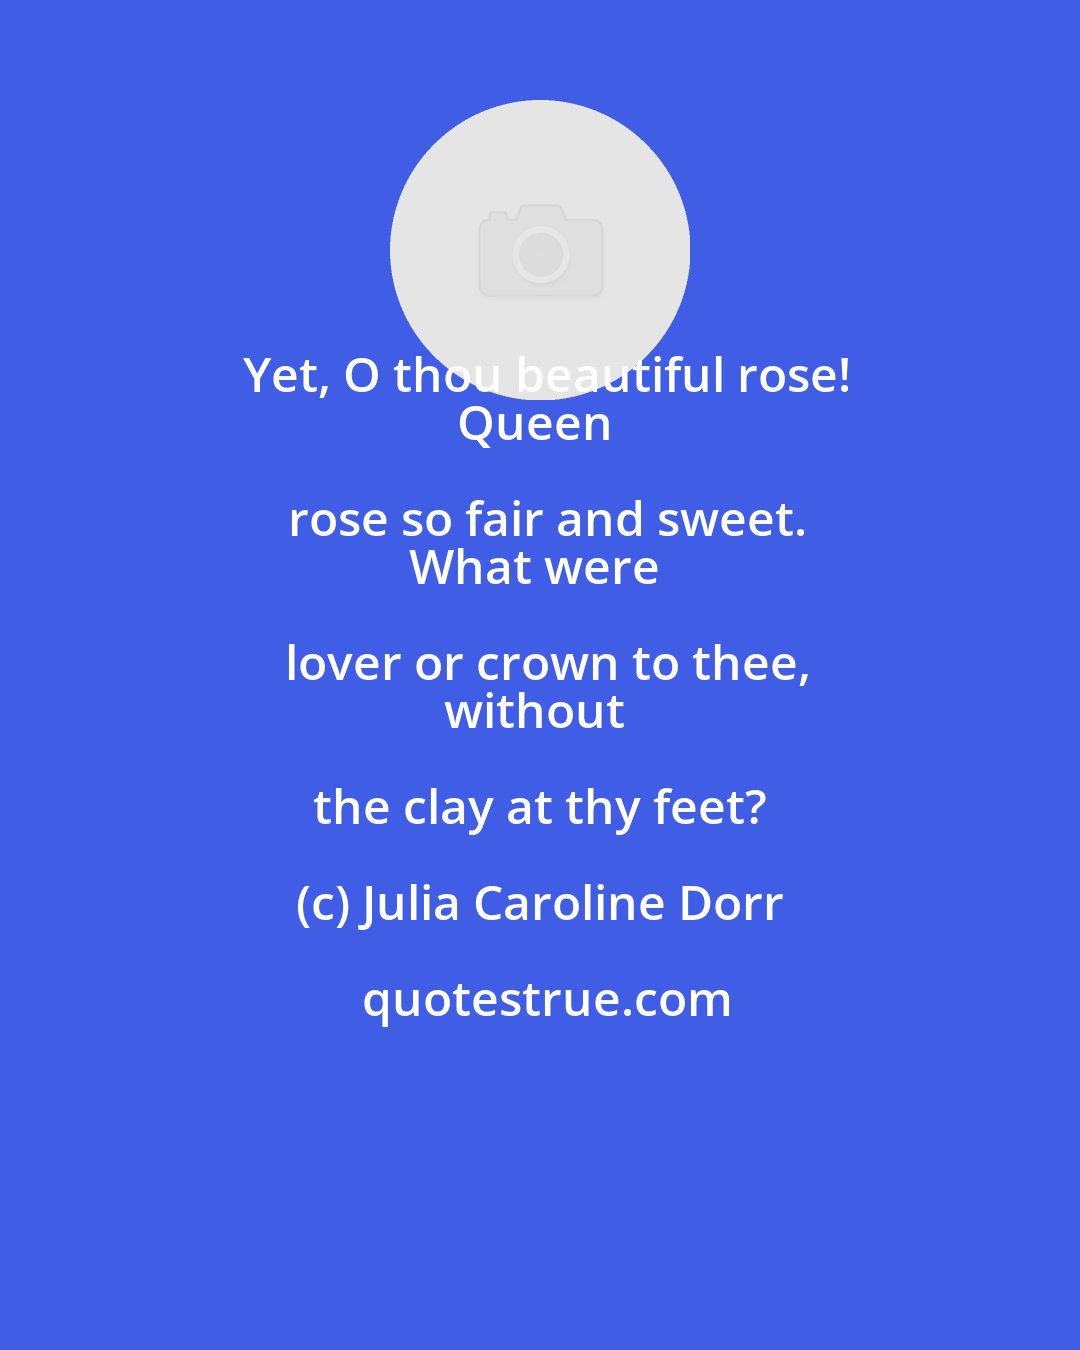 Julia Caroline Dorr: Yet, O thou beautiful rose!
Queen rose so fair and sweet.
What were lover or crown to thee,
without the clay at thy feet?